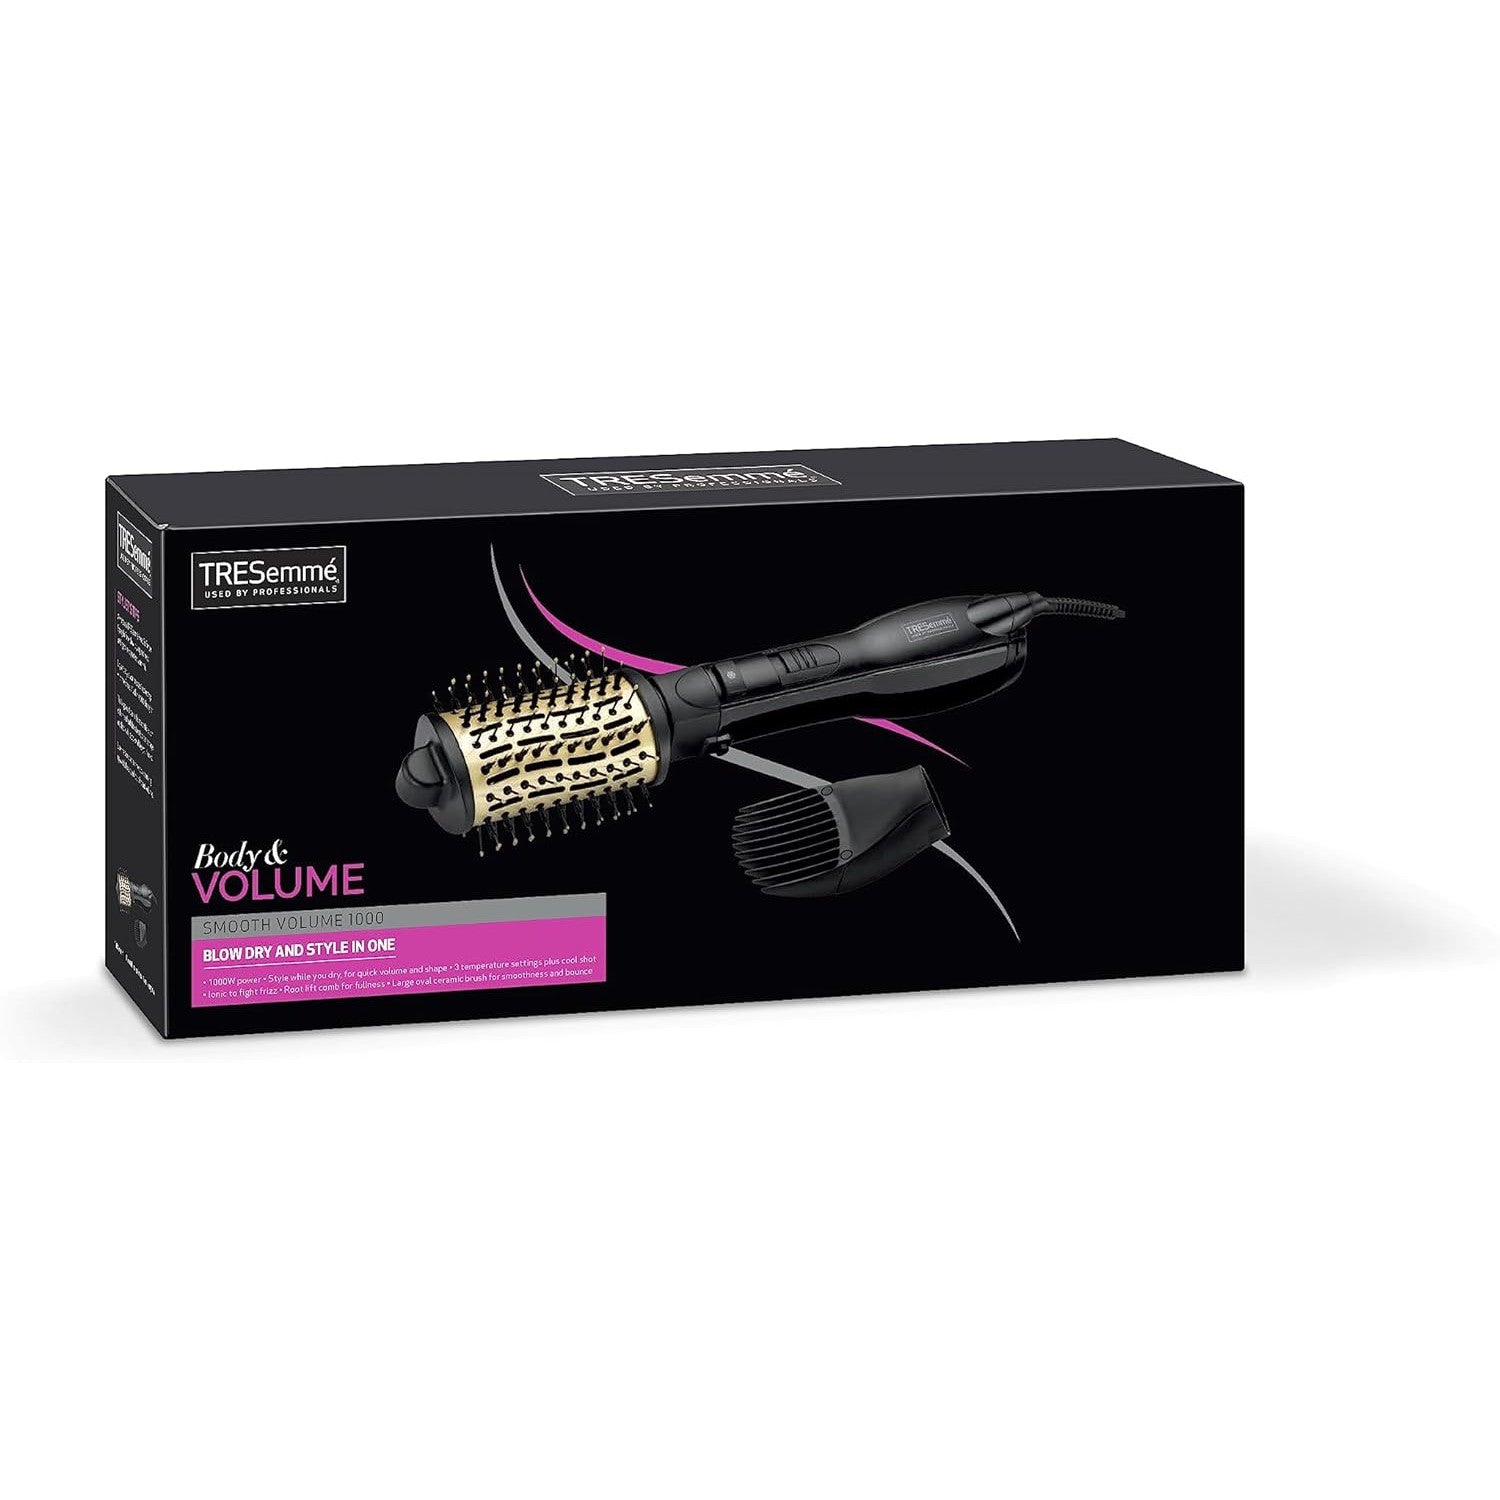 TRESemme Smooth Volume 1000W Hair Dryer Brush, 2 in-1 Hot Air Style